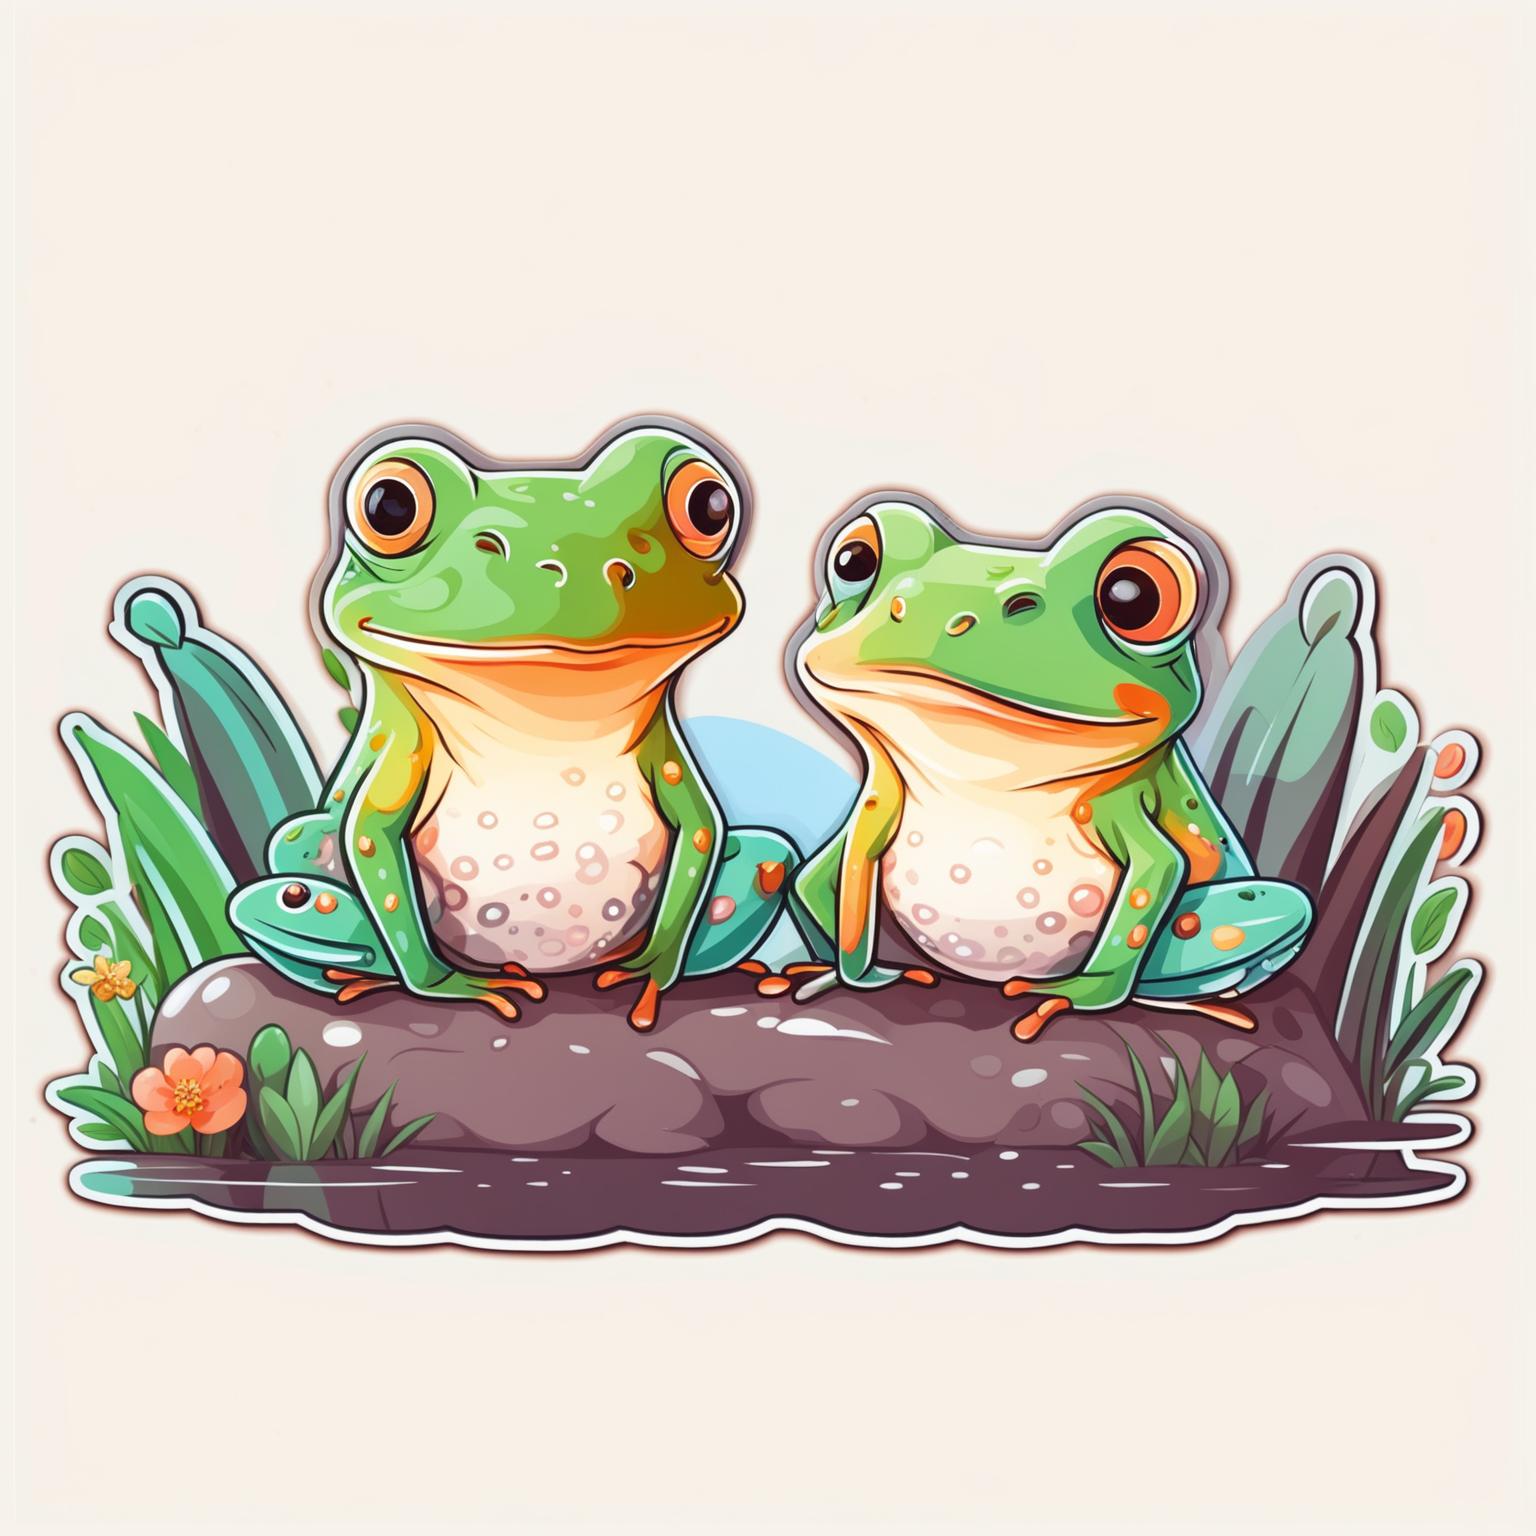 Sticker design of two adorable frogs with cute expressions, interacting playfully, surrounded by small flowers, grass, and leaves